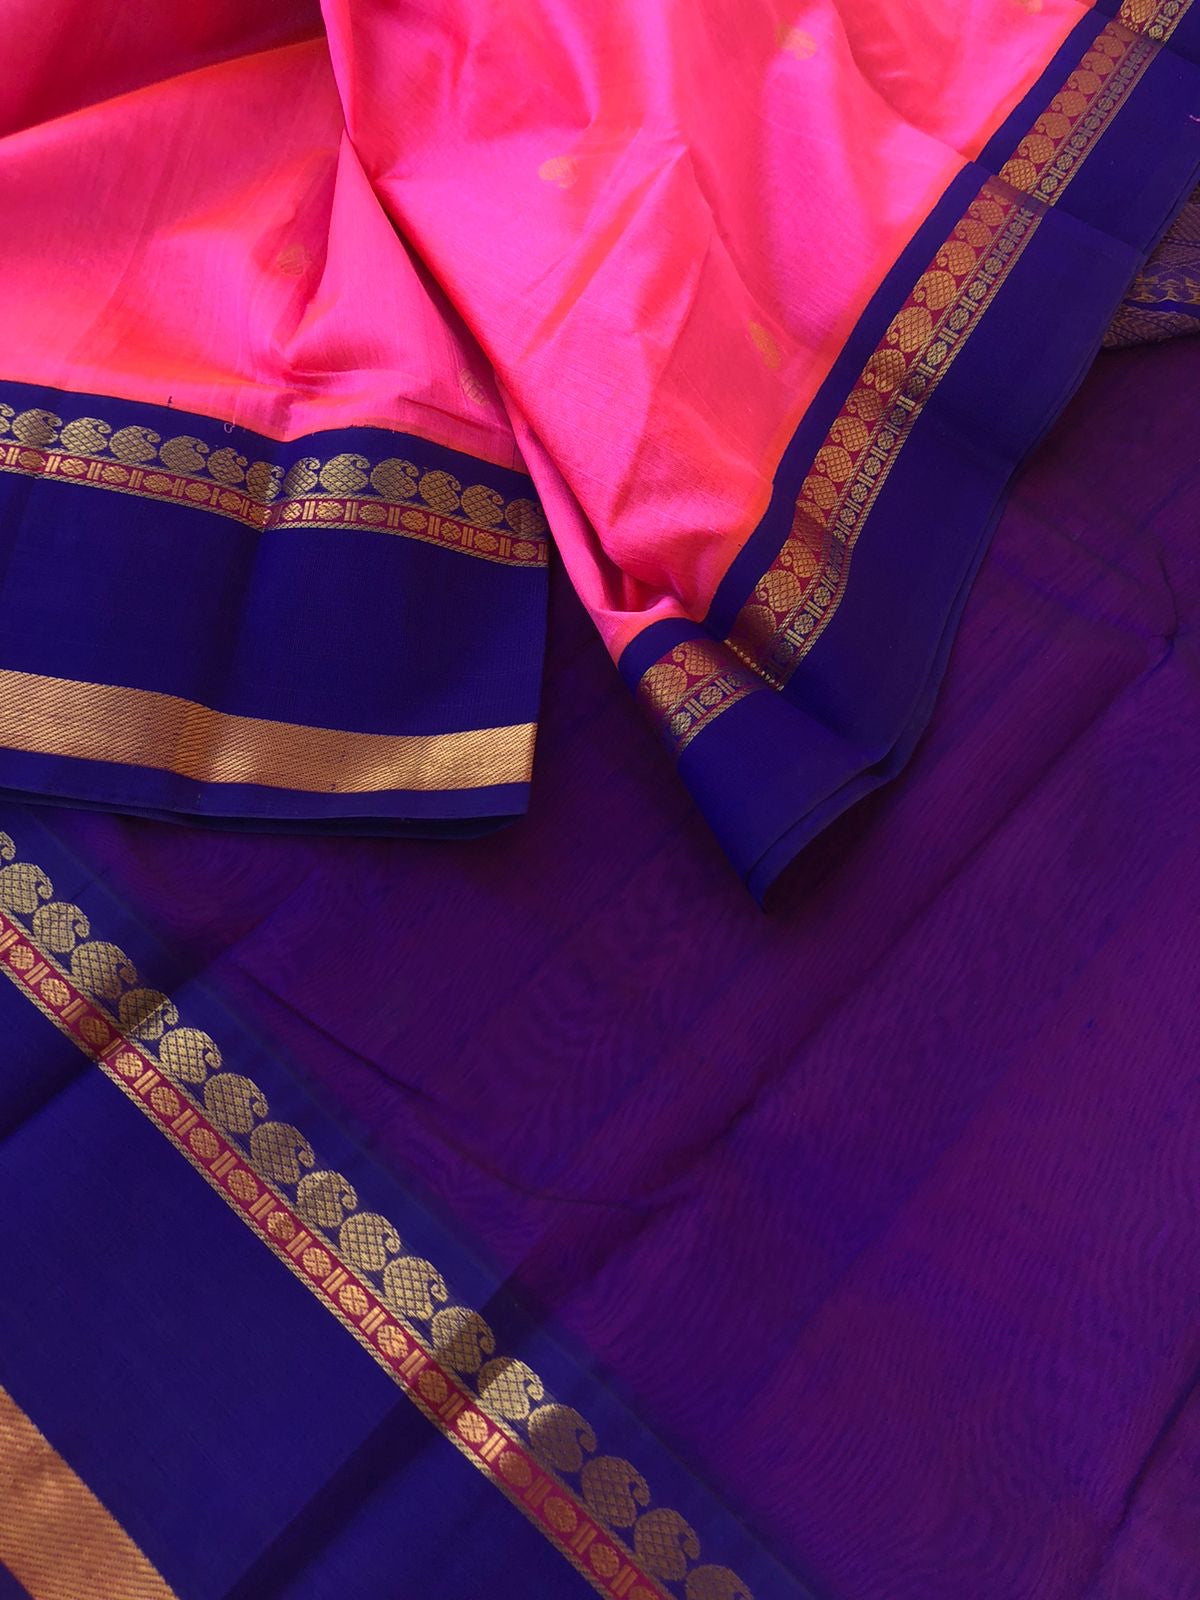 Margazhi Vibrs on Korvai Silk Cotton - candy pink and violet